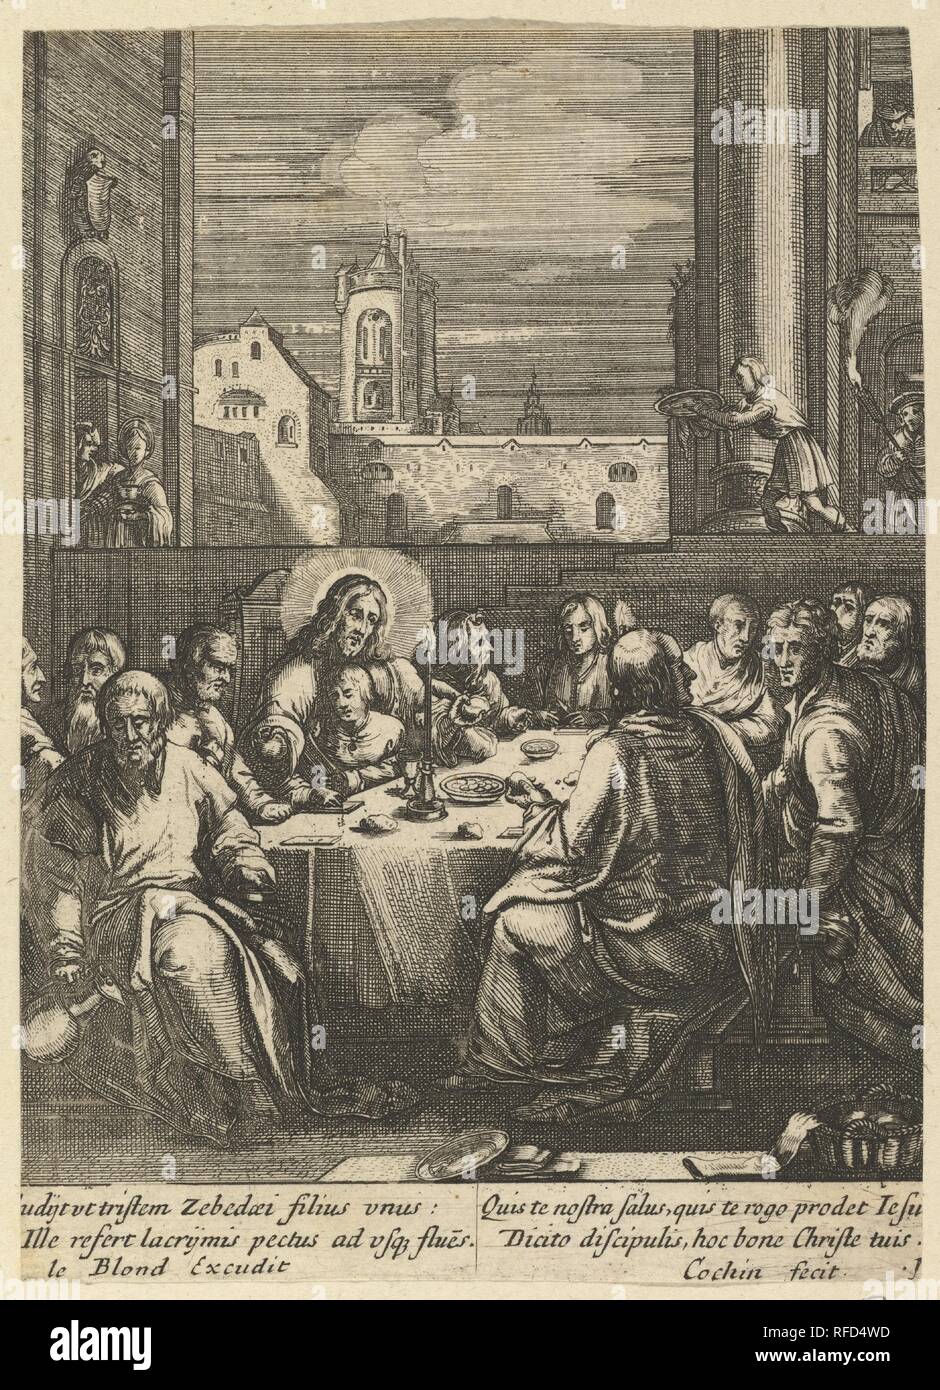 The Last Supper, from The Passion of Christ. Artist: After Hendrick Goltzius (Netherlandish, Mühlbracht 1558-1617 Haarlem); Nicolas Cochin (French, Troyes 1610-1686 Paris). Dimensions: Sheet: 5 3/8 × 7 13/16 in. (13.6 × 19.8 cm). Publisher: Jean I Leblond (French, ca. 1590-1666 Paris). Date: mid 17th century. Museum: Metropolitan Museum of Art, New York, USA. Stock Photo